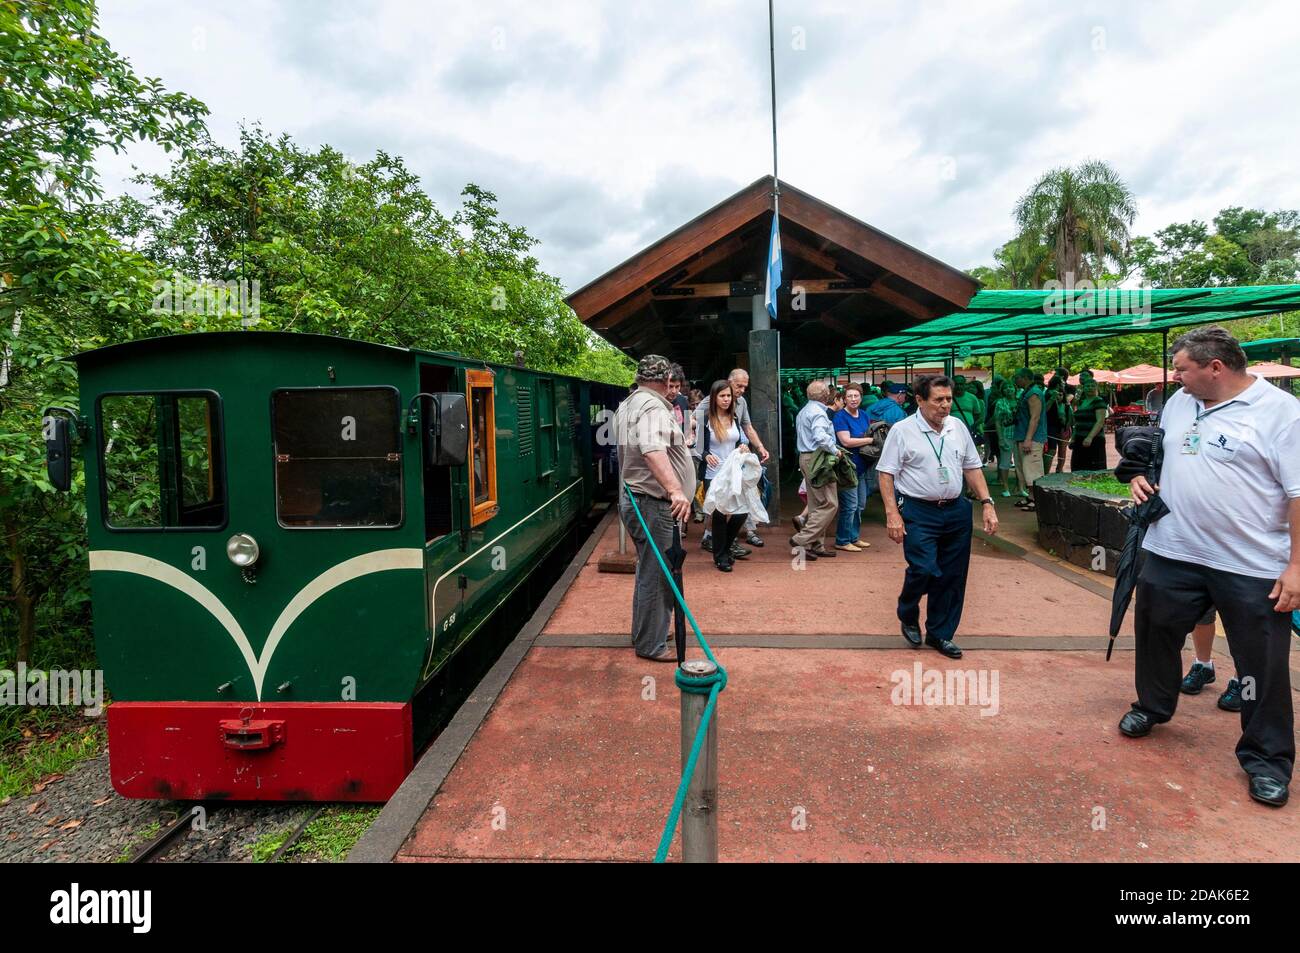 Visitors alight the Jungle train ( Rainforest Ecological Train)  at one of the two stations in the Iguazu Waterfalls within the Iguazu National Park o Stock Photo